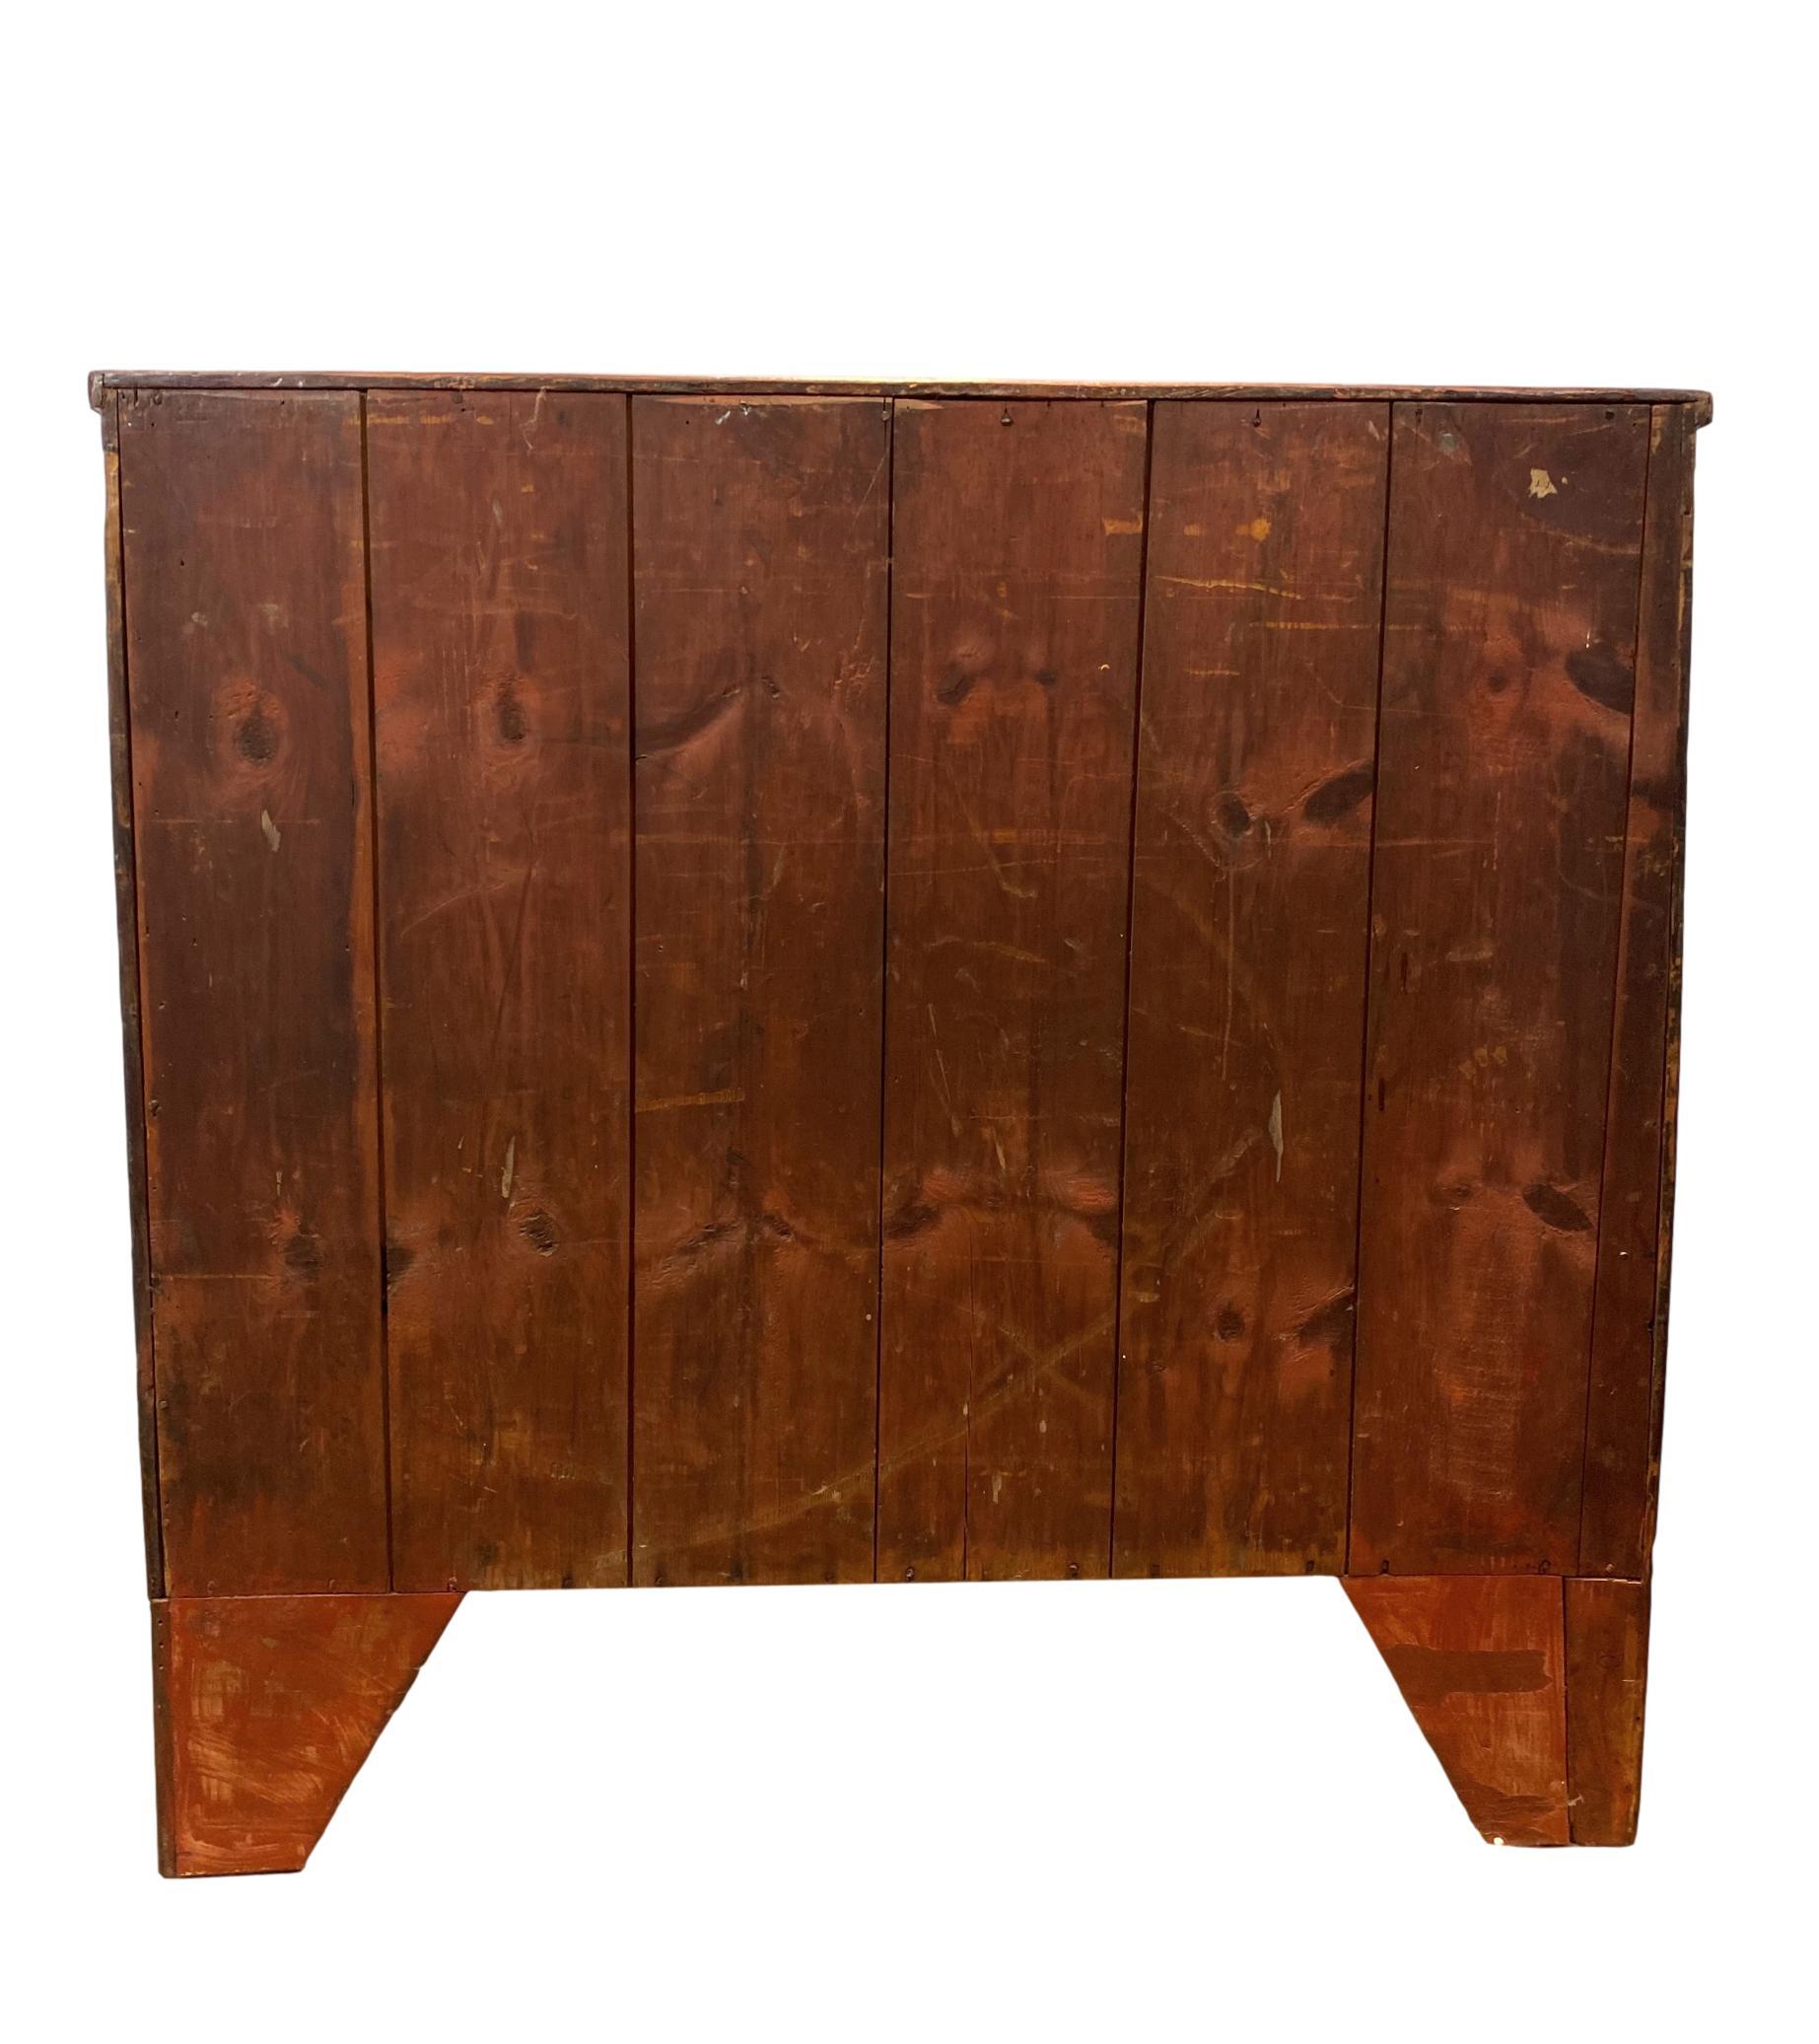 Early 19th Century George III Mahogany Chest-of-Drawers with Cross-Banding and Inlays, circa 1820